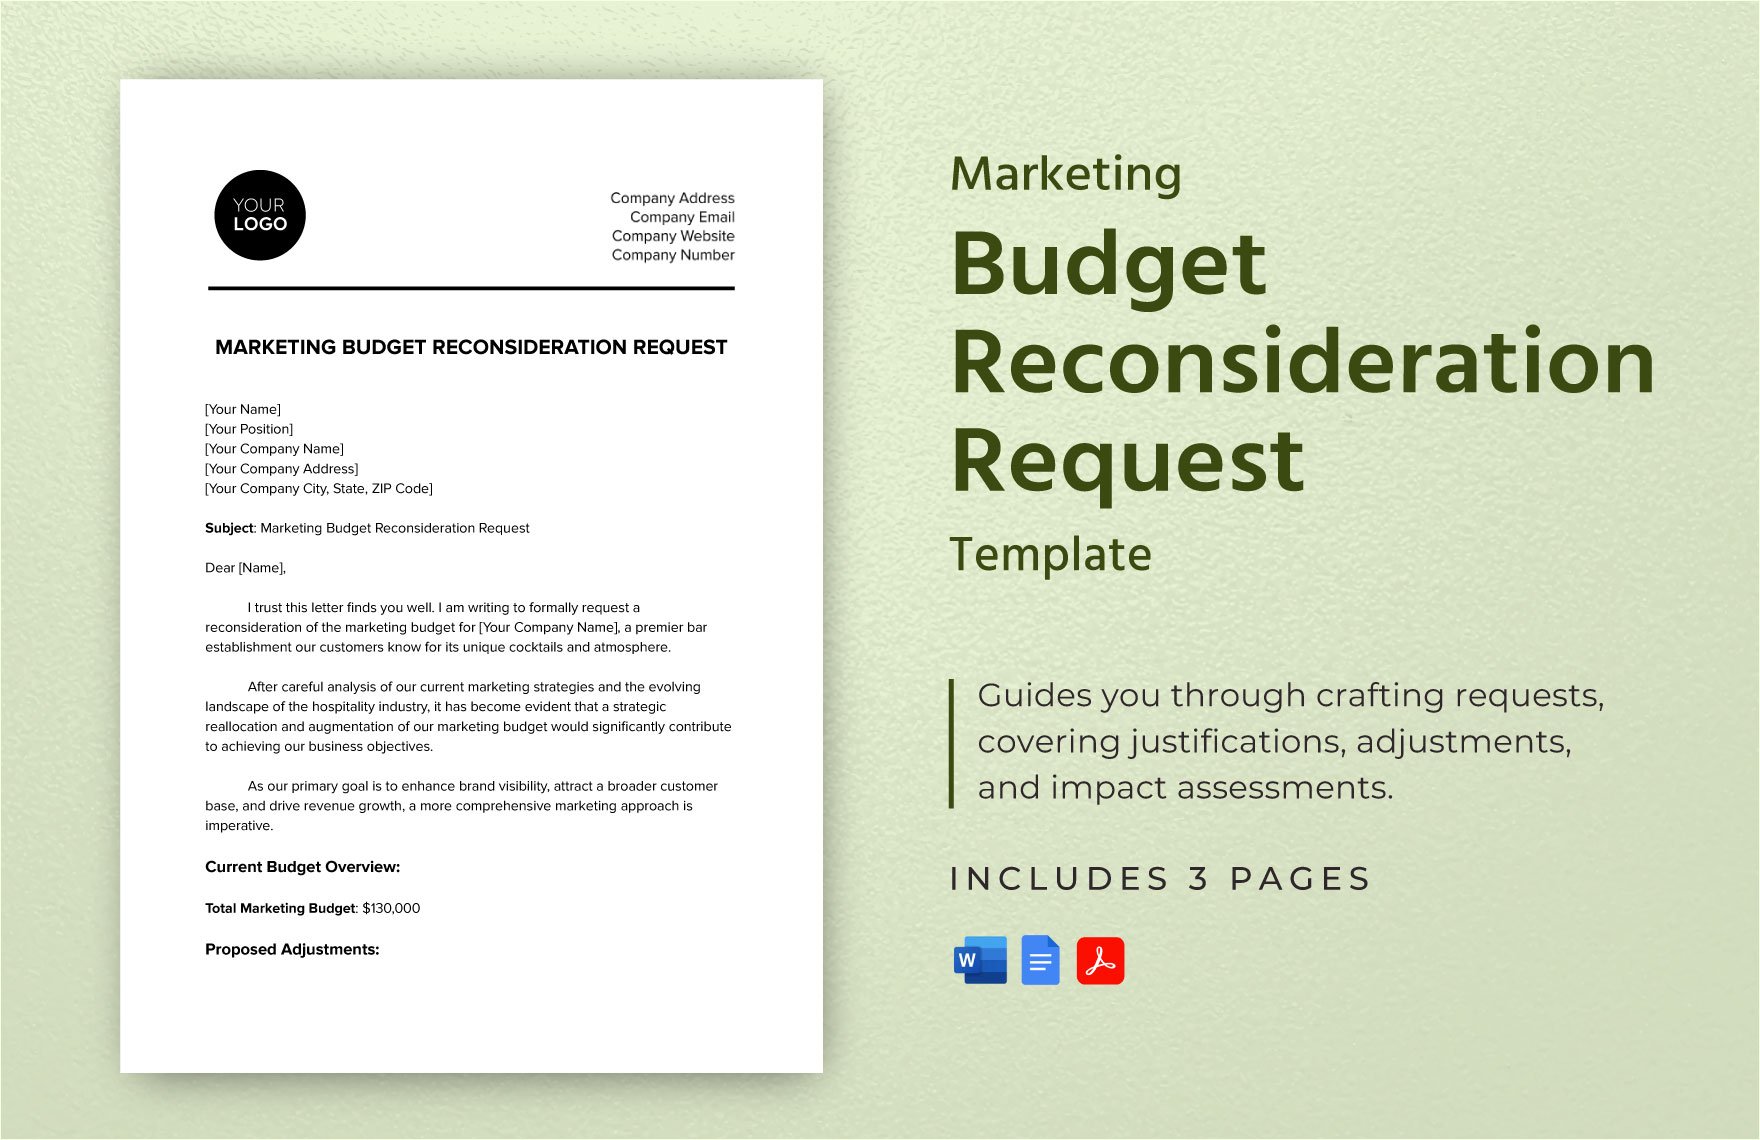 Marketing Budget Reconsideration Request Template